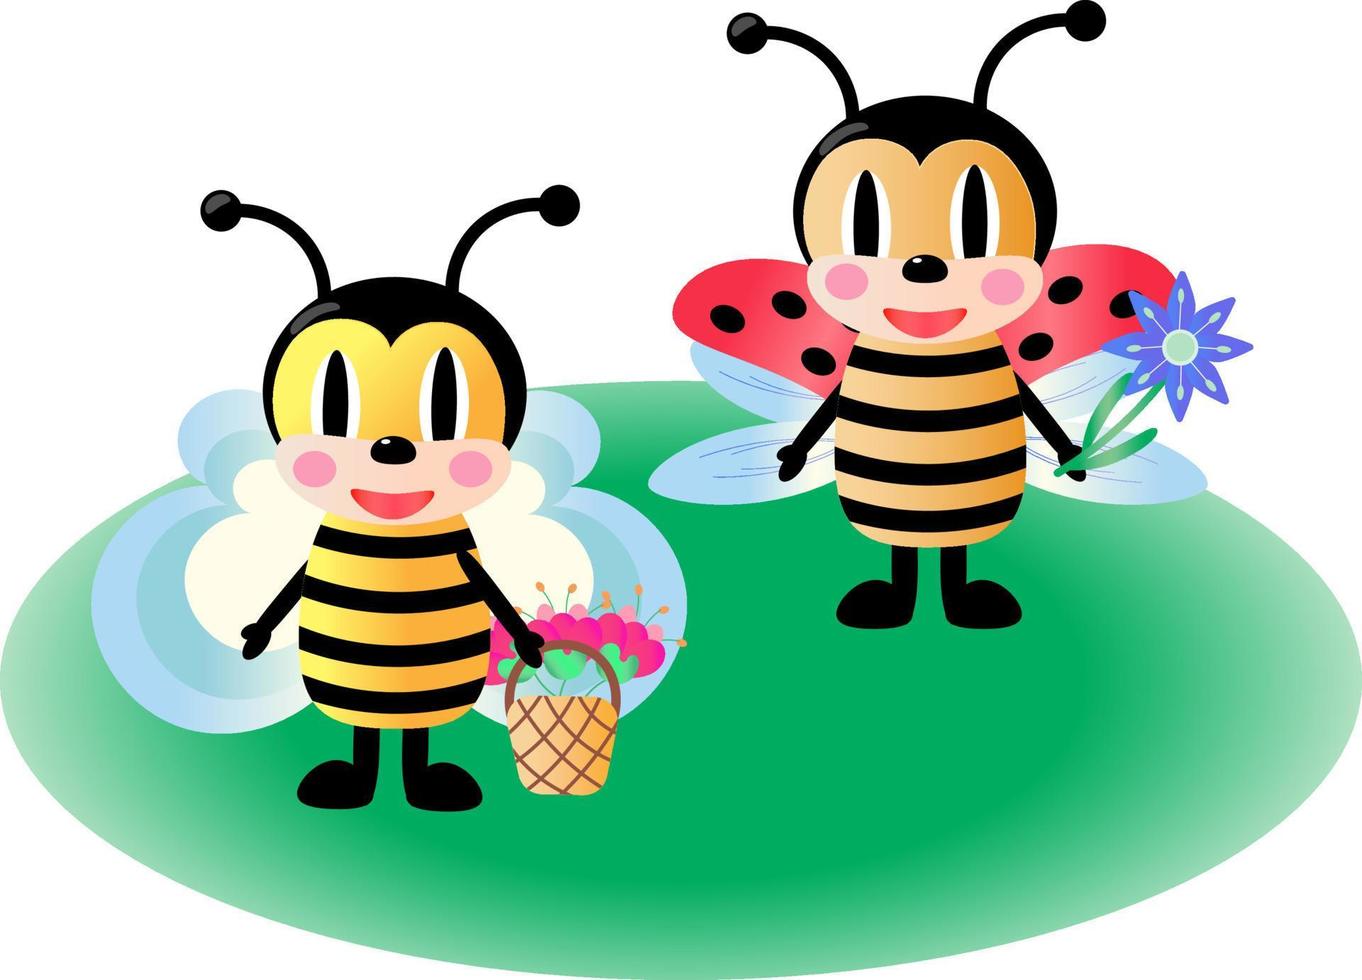 Cute bee and ladybug. Green lawn and flowers. Vector cartoon illustration isolated on white background.